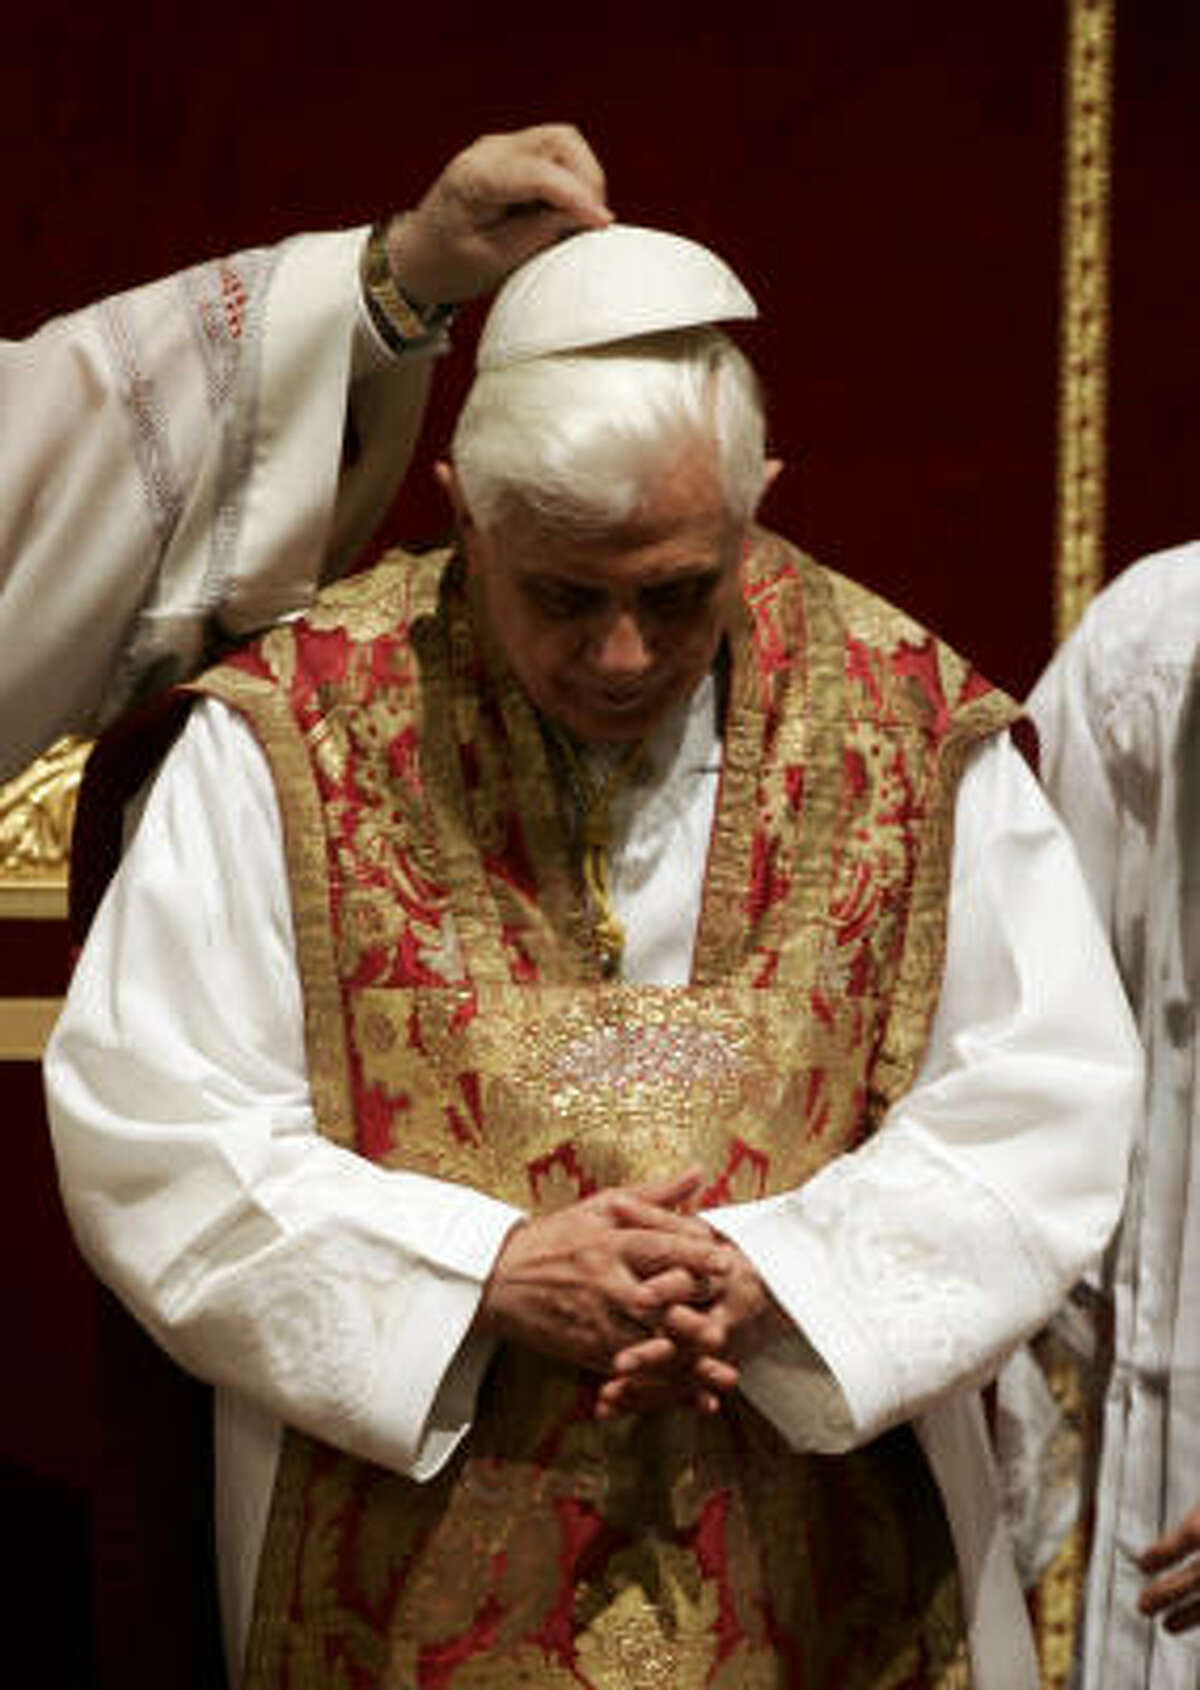 Pope Benedict XVI, wearing a fiddleback chasuble, has his cap placed back on his head after praying during a Mass for the unveiling and adoration of the Cross in St. Peter's Basilica in March.